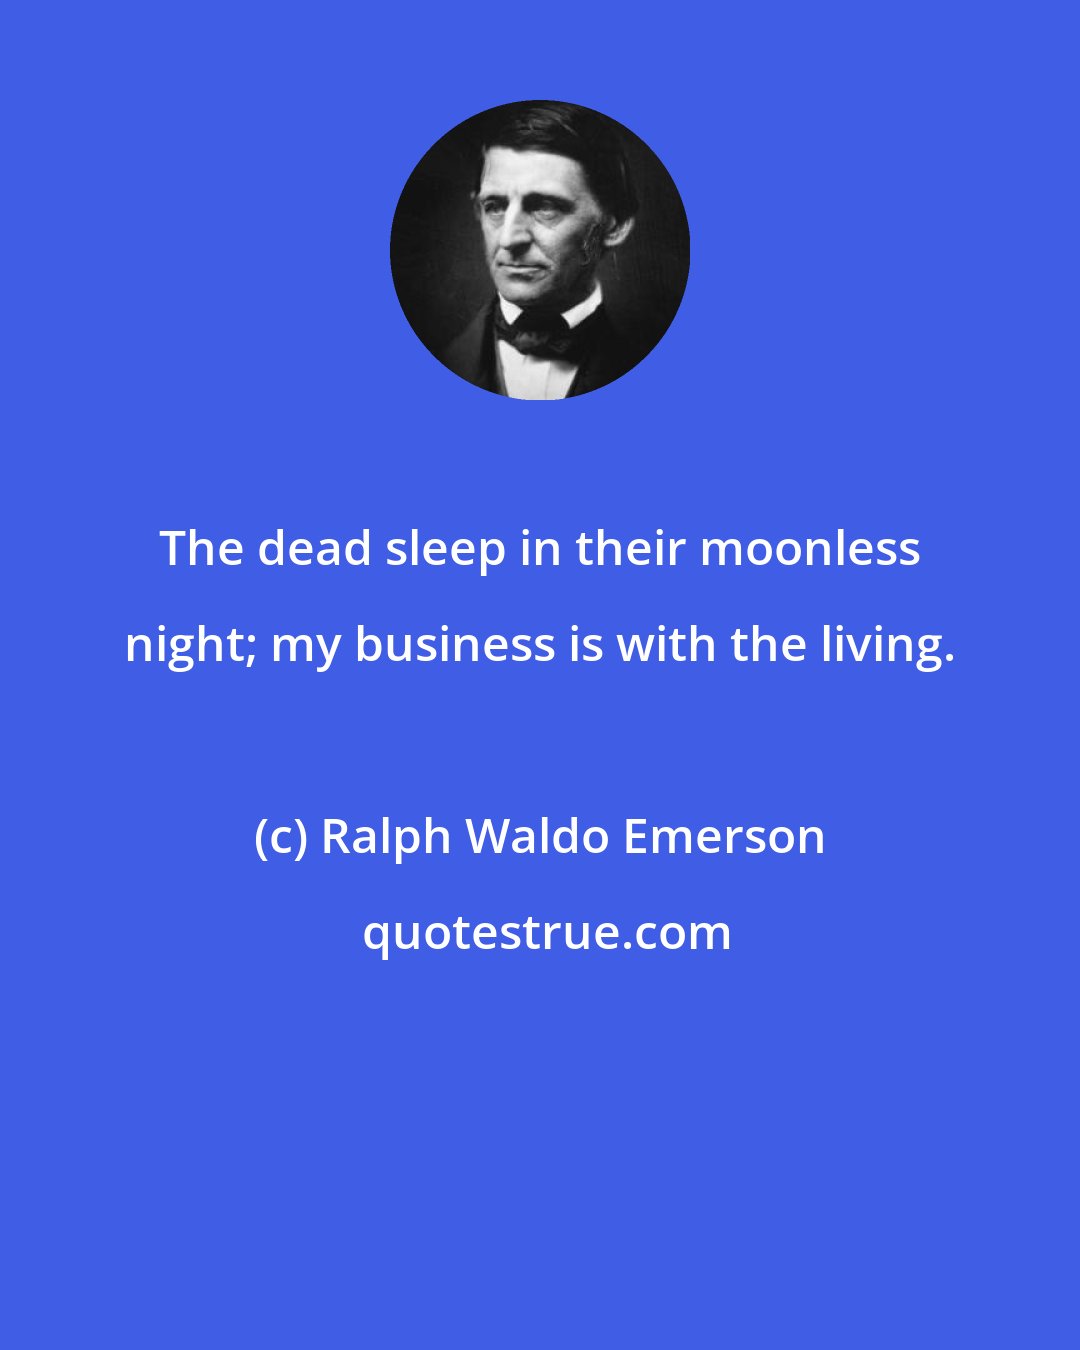 Ralph Waldo Emerson: The dead sleep in their moonless night; my business is with the living.